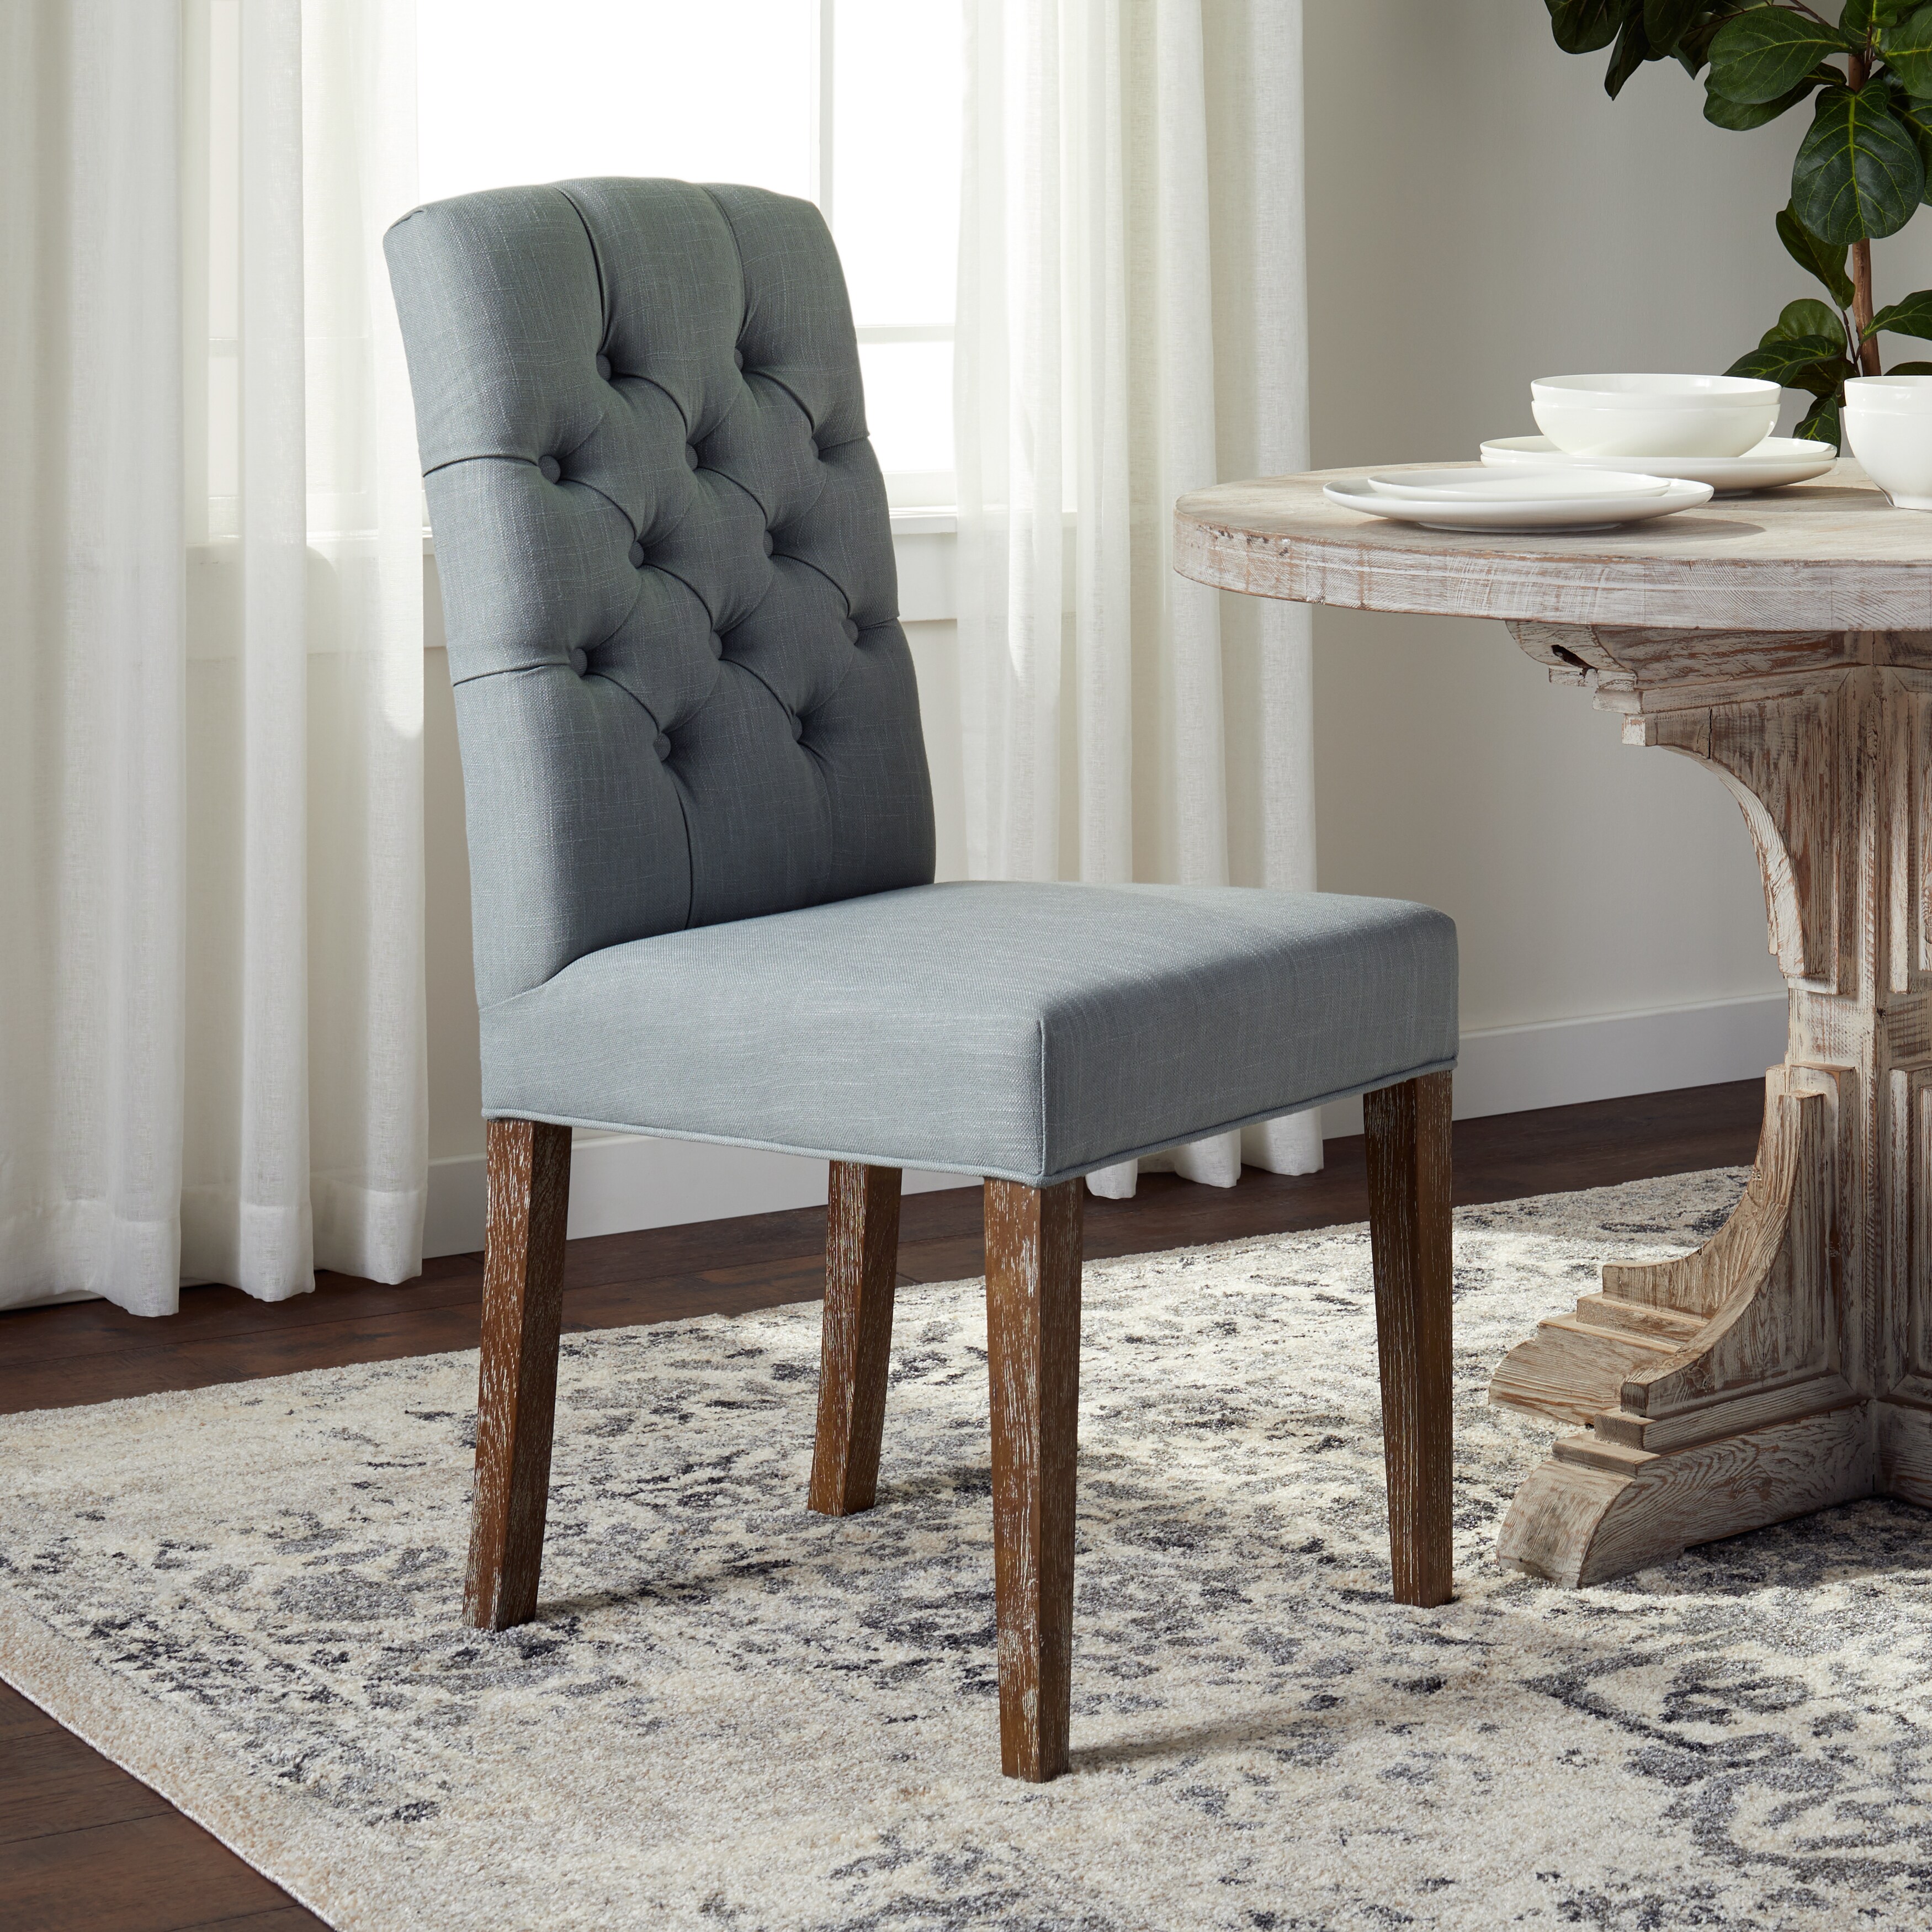 Abbyson Colin Seafoam Blue Linen Tufted Dining Chair Blue Modern And Contemporary Ebay